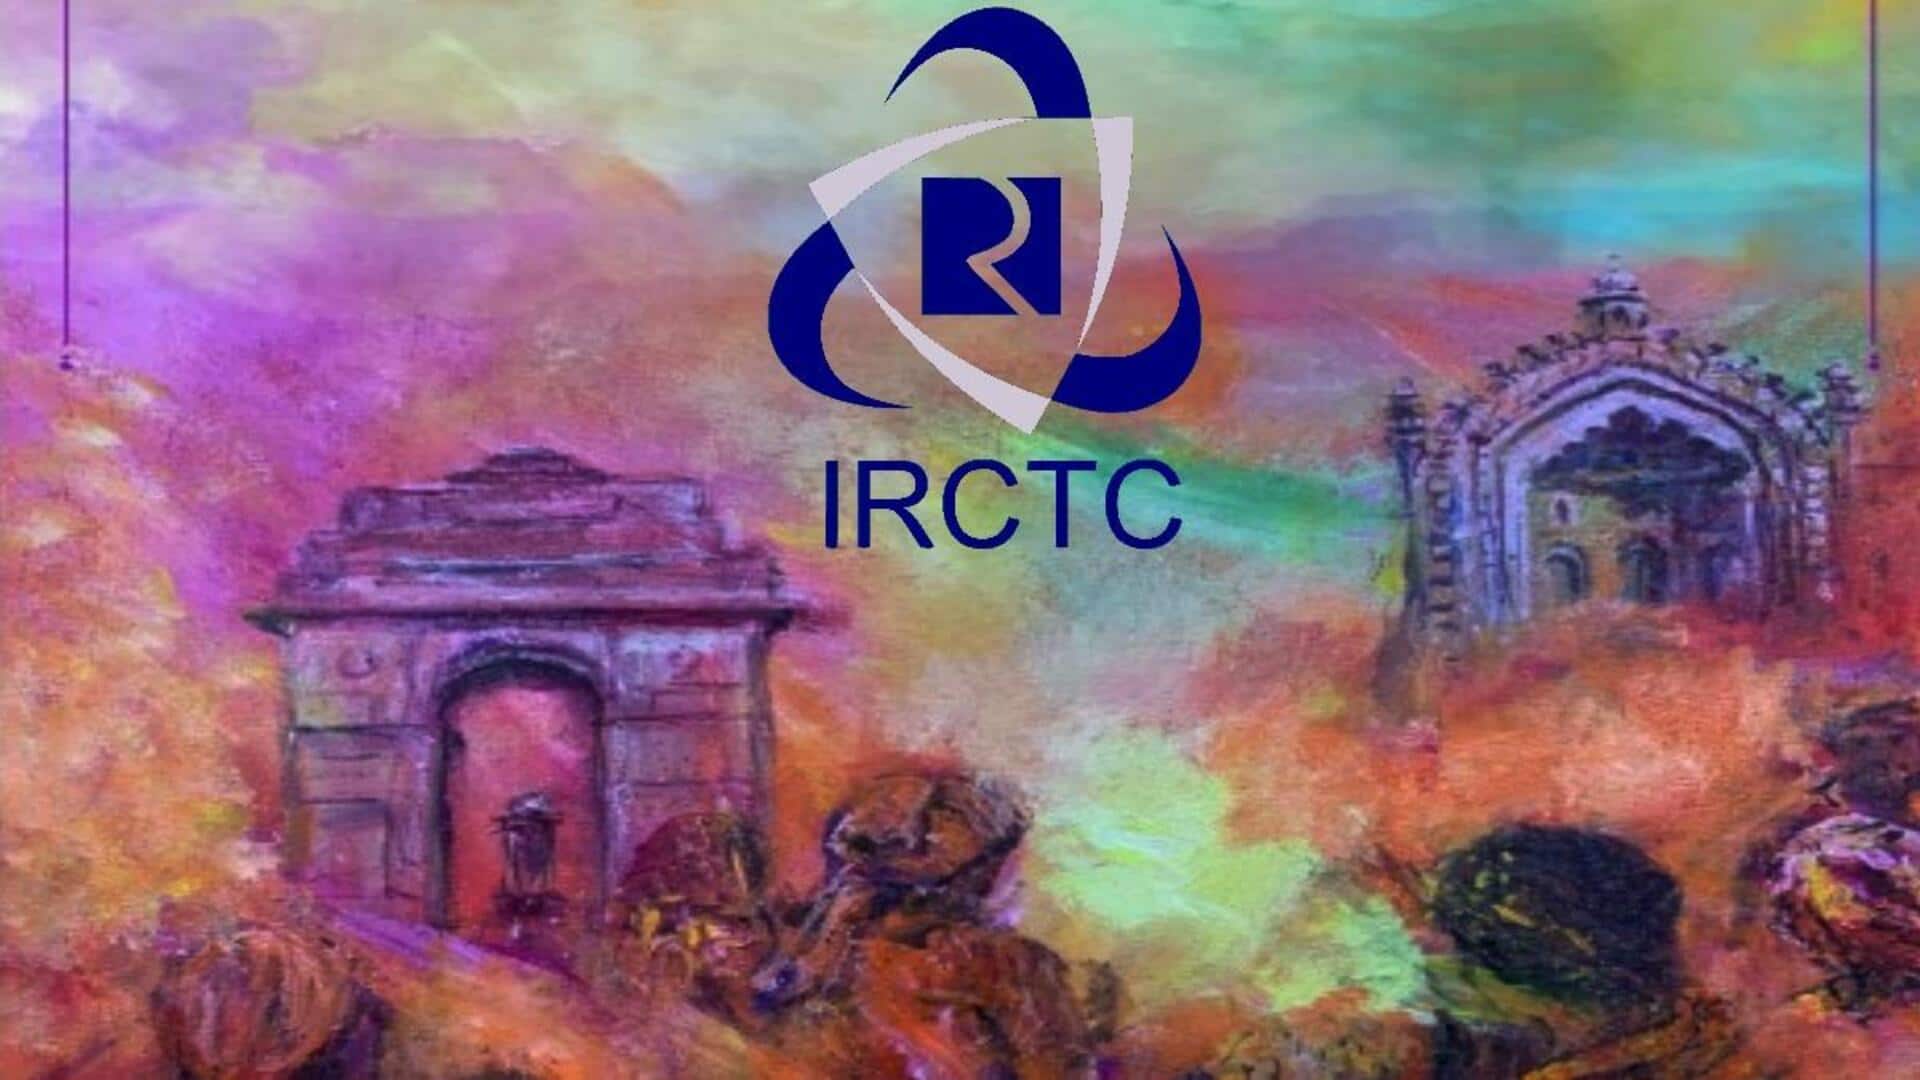 IRCTC launches Holi-themed NFT tickets for Lucknow-Delhi Tejas trains